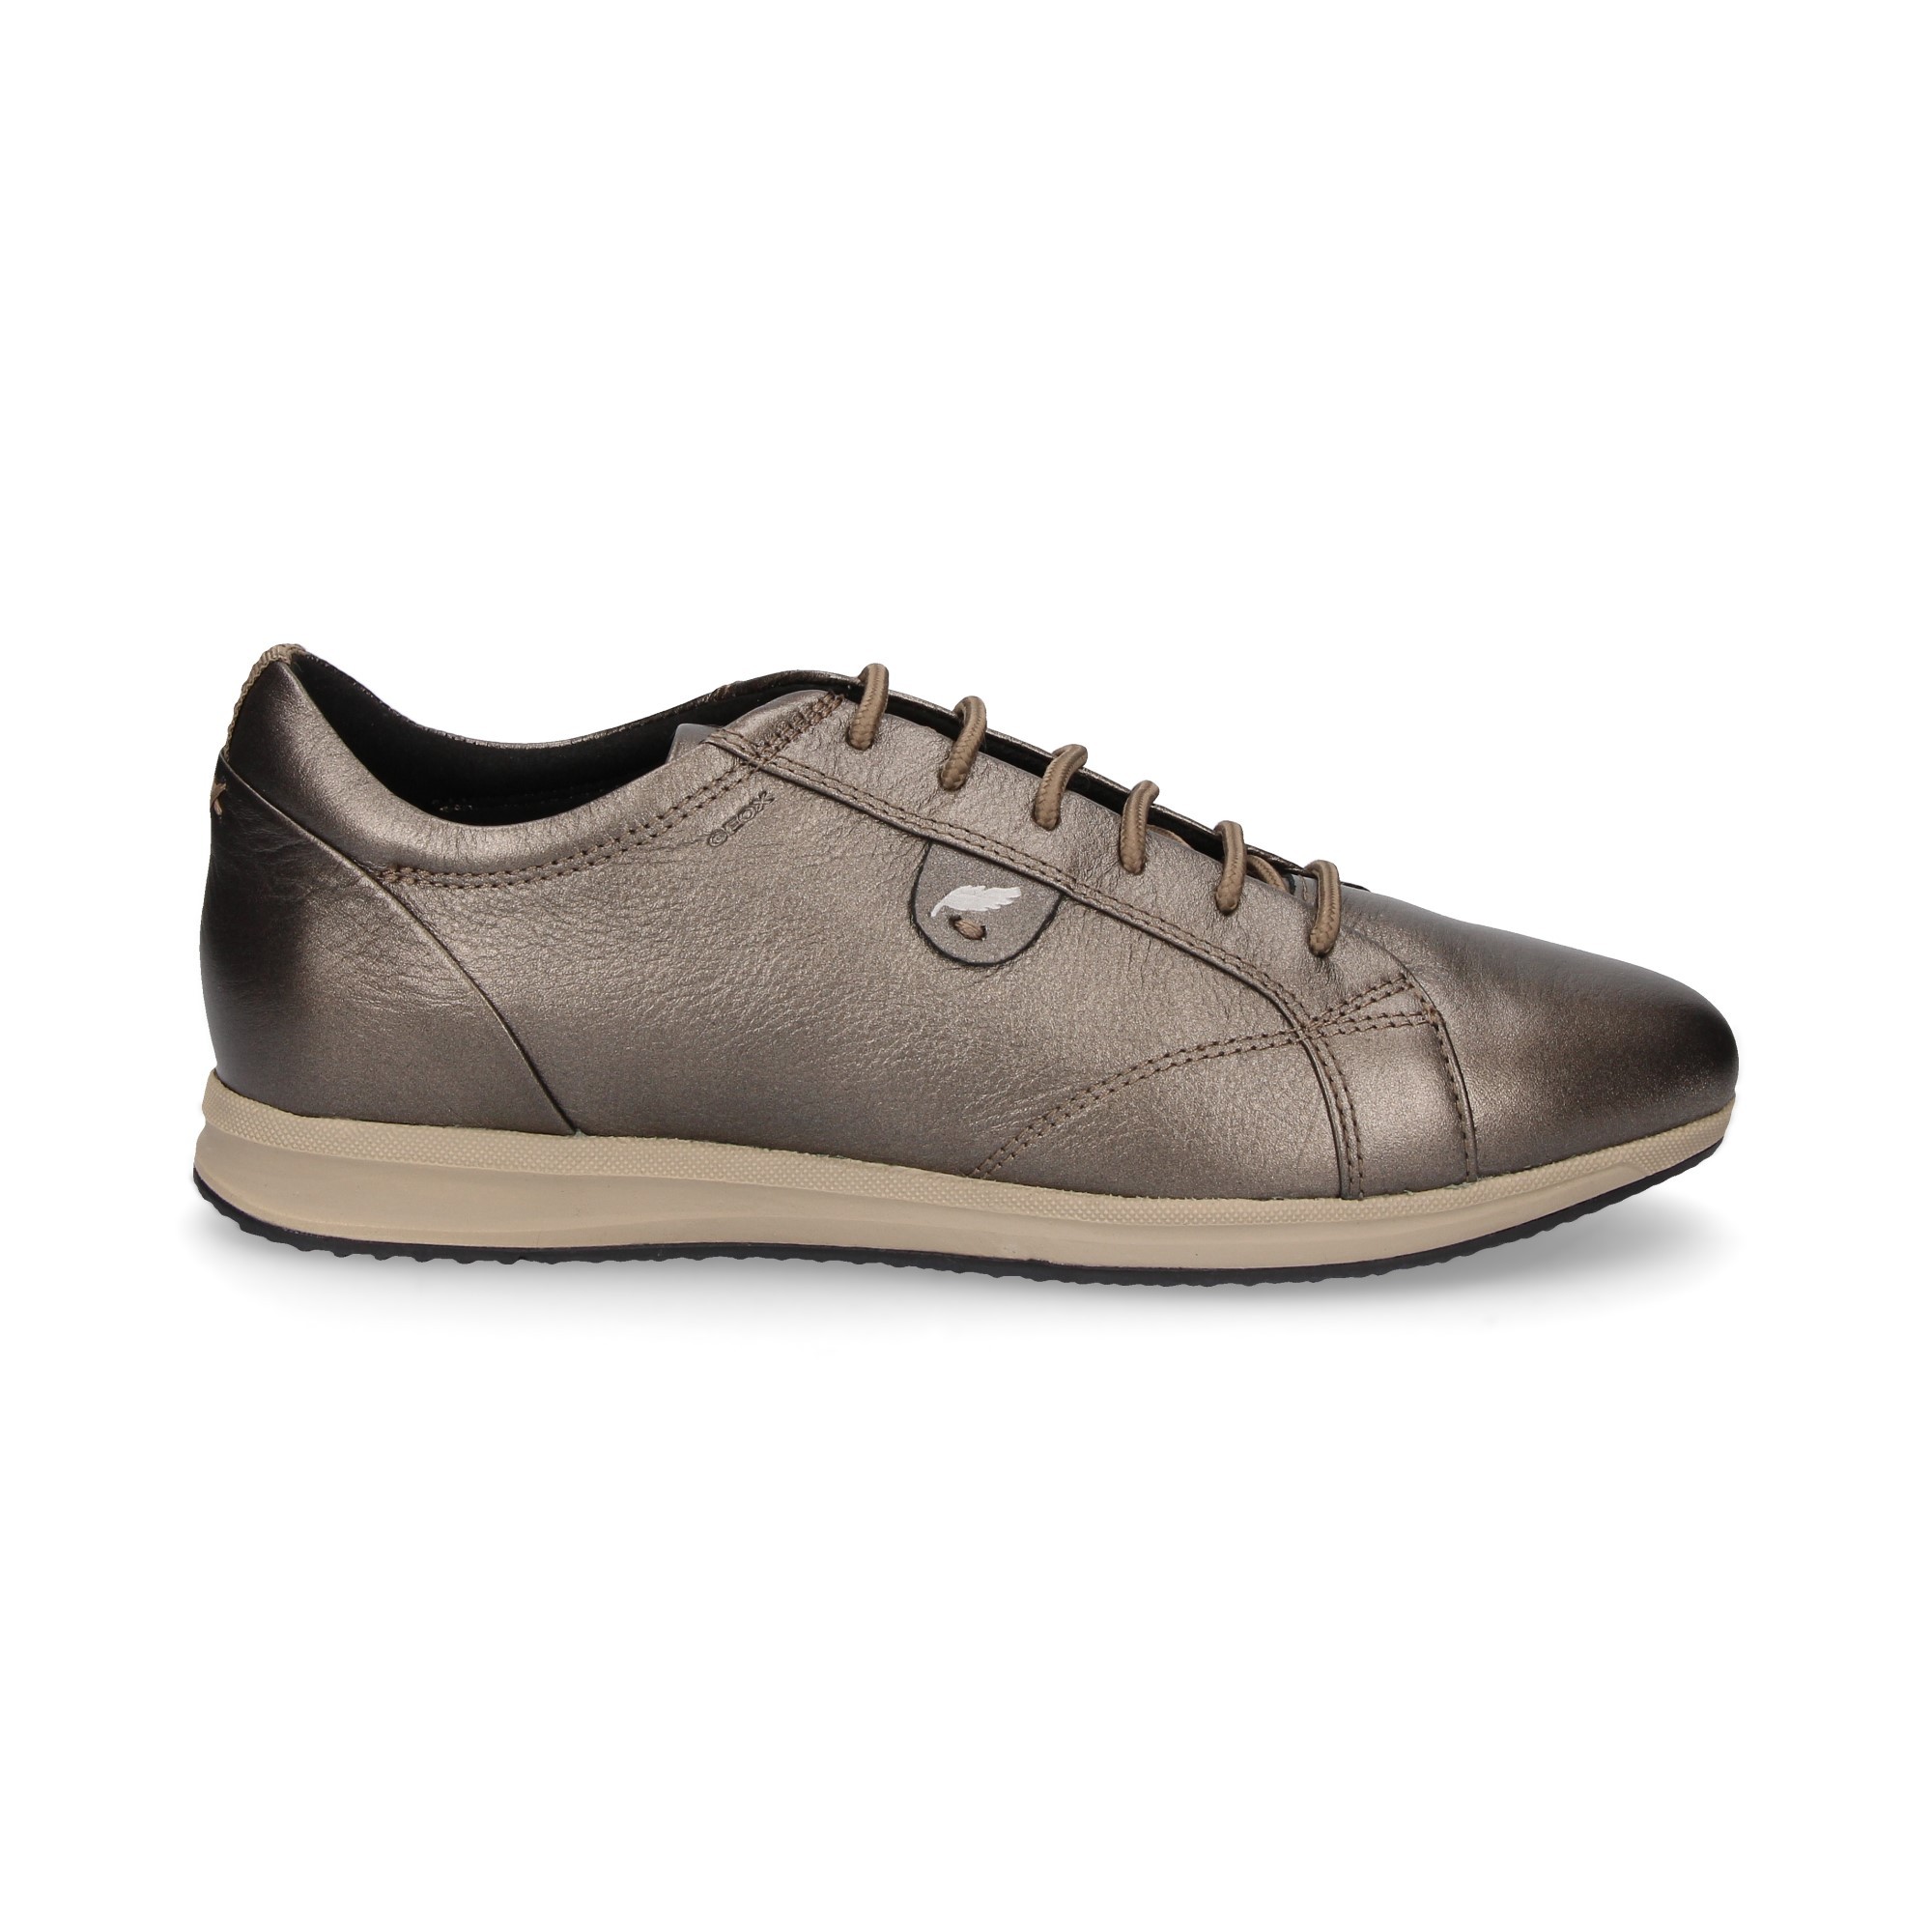 LACETS EN CUIR SPORT TAUPE TAUPE